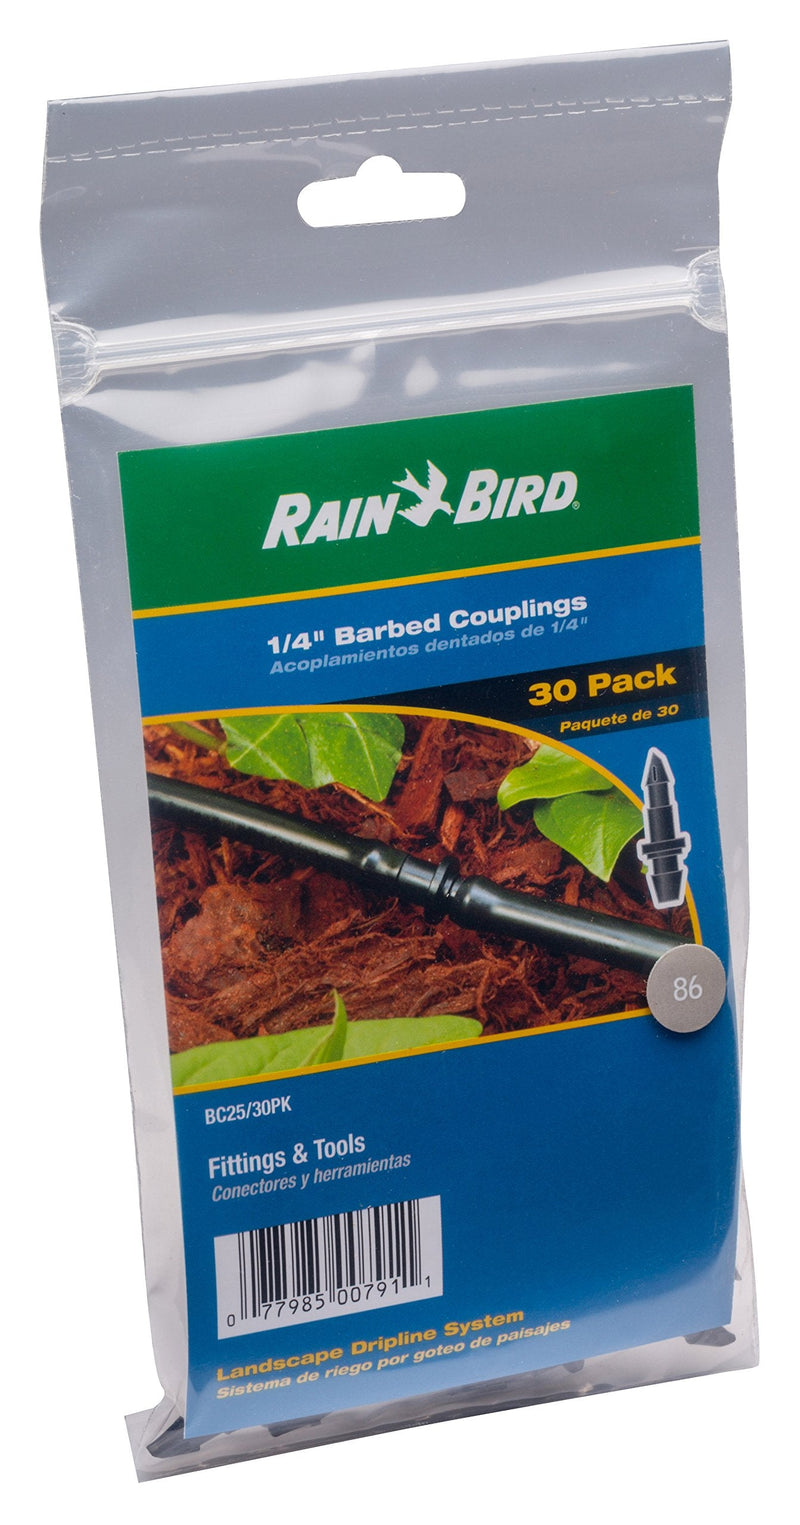  [AUSTRALIA] - Rain Bird BC25-30PS Drip Irrigation Universal 1/4" Barbed Coupling Fitting, Fits All Sizes of 1/4" Drip Tubing, 30-Pack Coupler 30-Pack